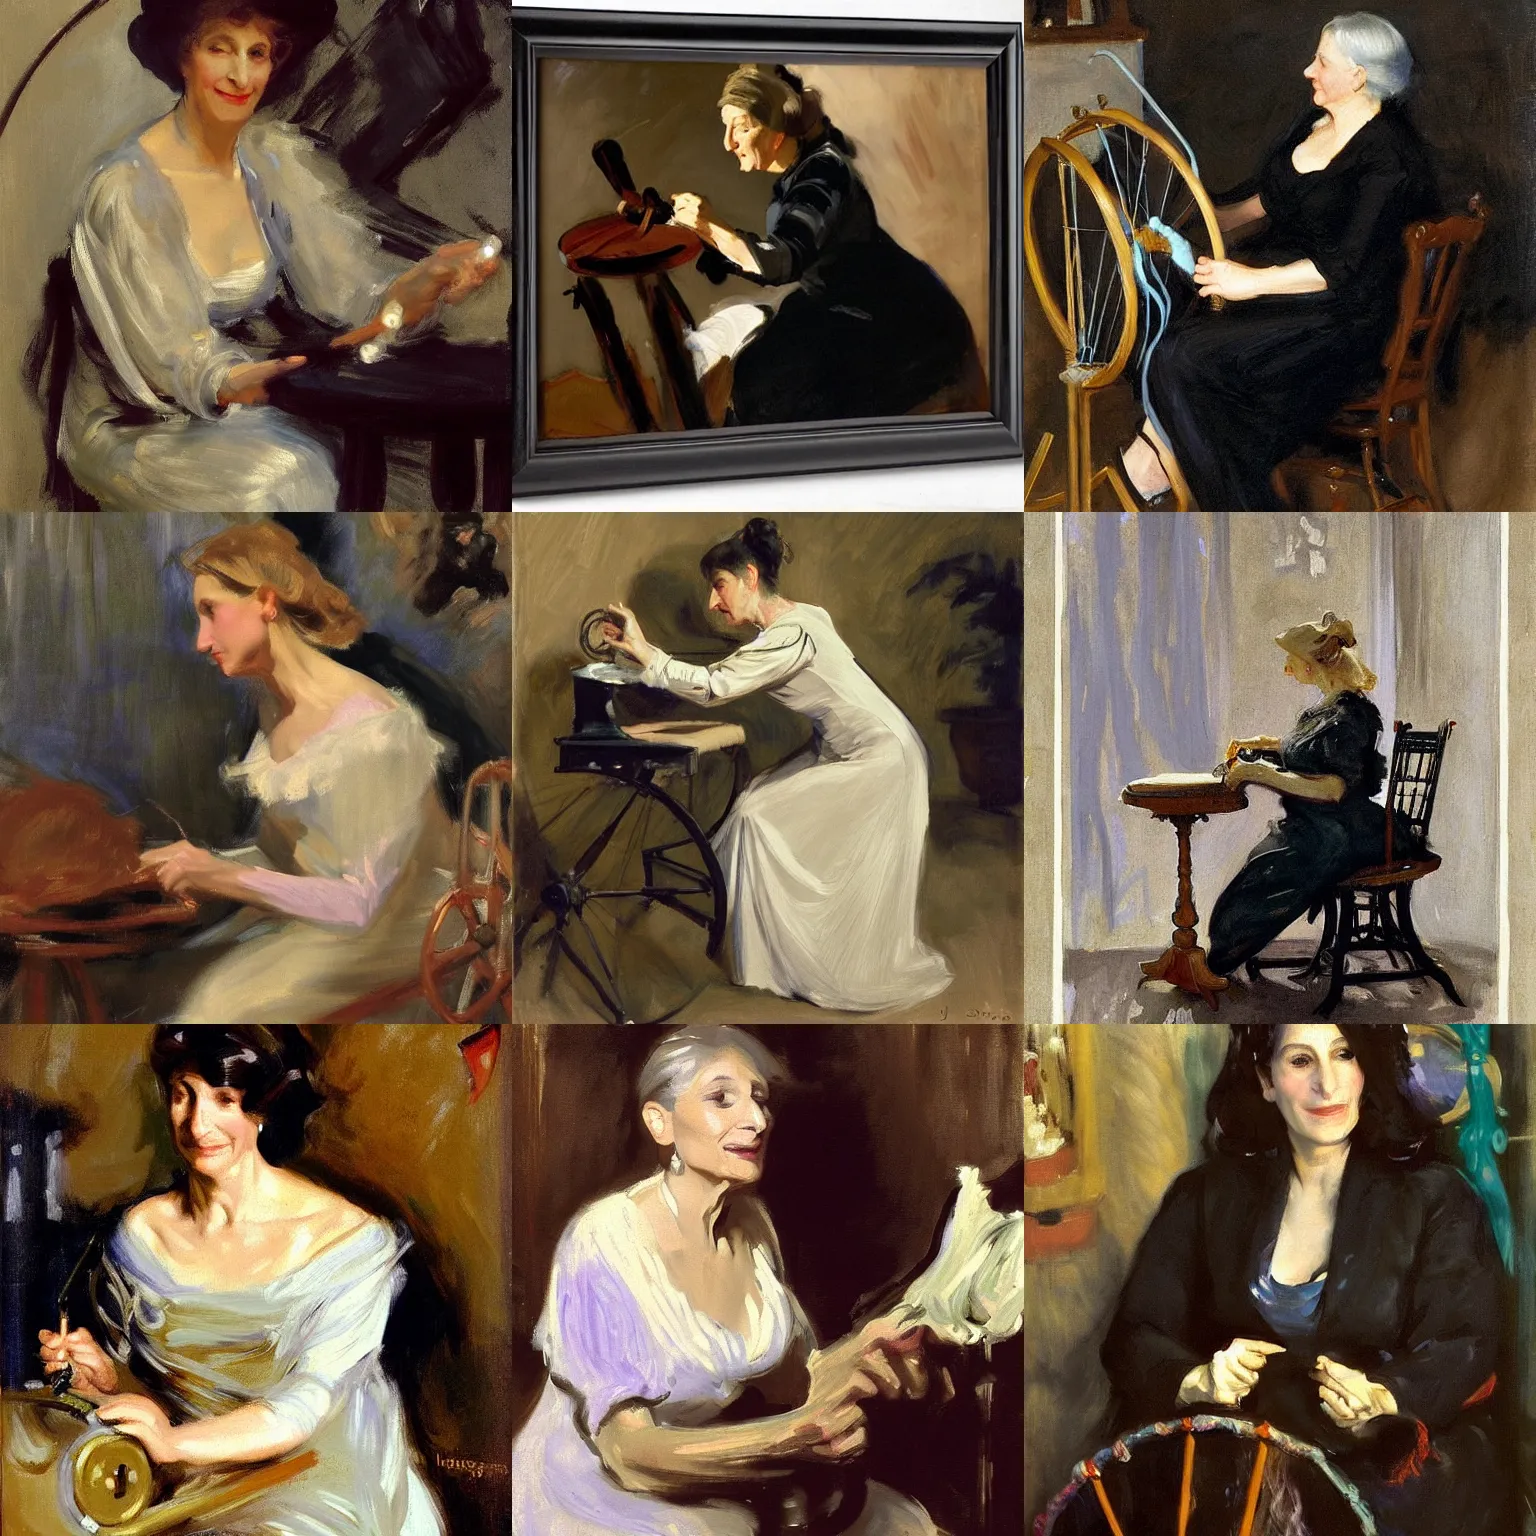 Prompt: A 50 year old woman who looks like Barbara Streisand is spinning yarn on a spinning wheel, by john singer sargent